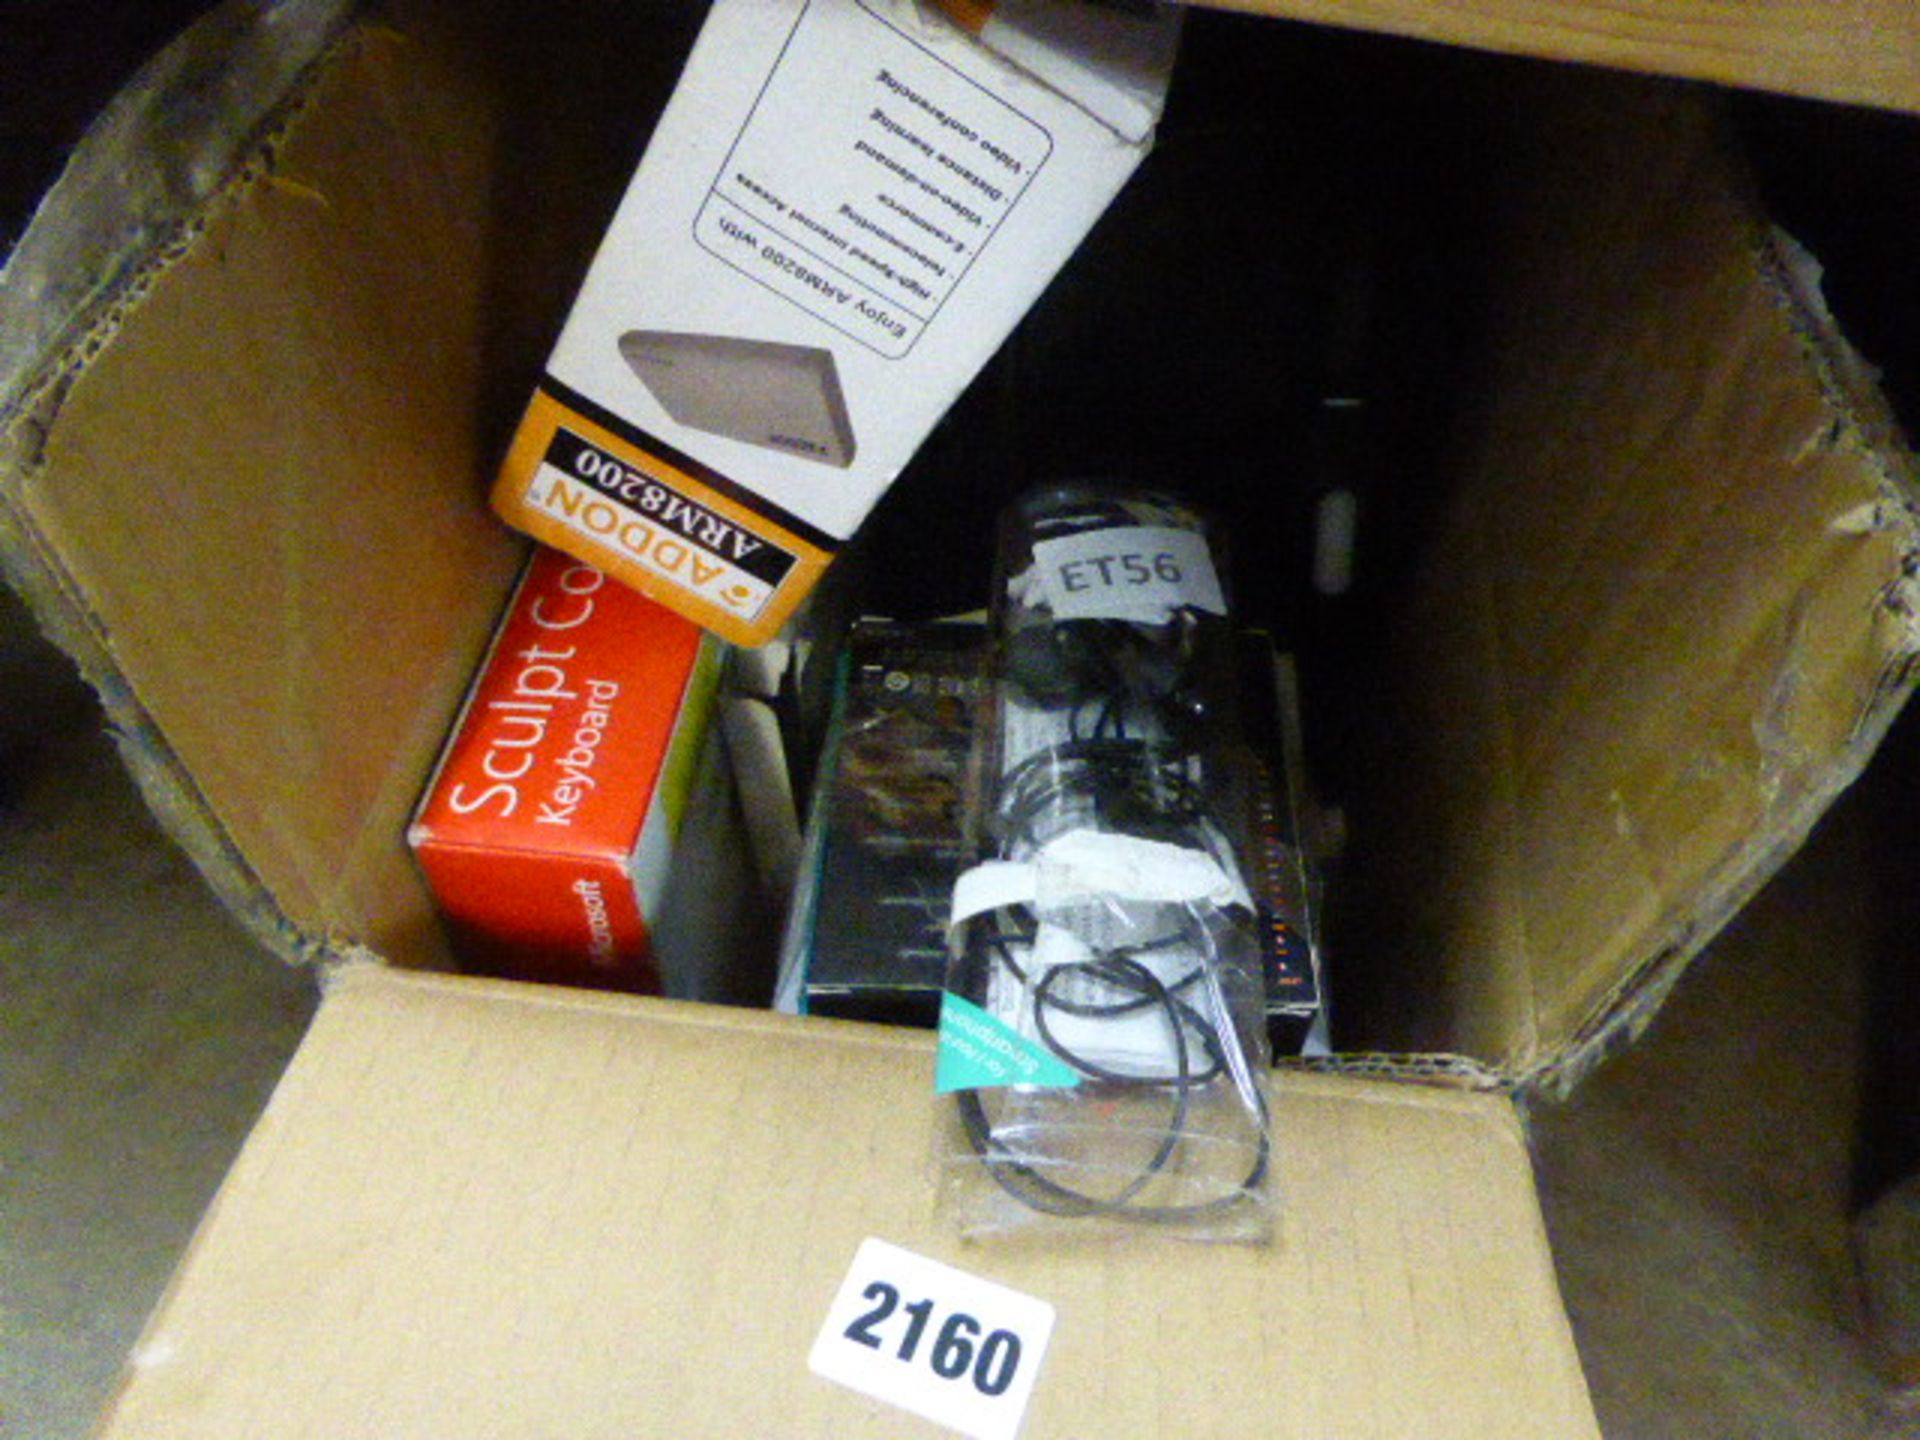 Box containing misc. electronic items